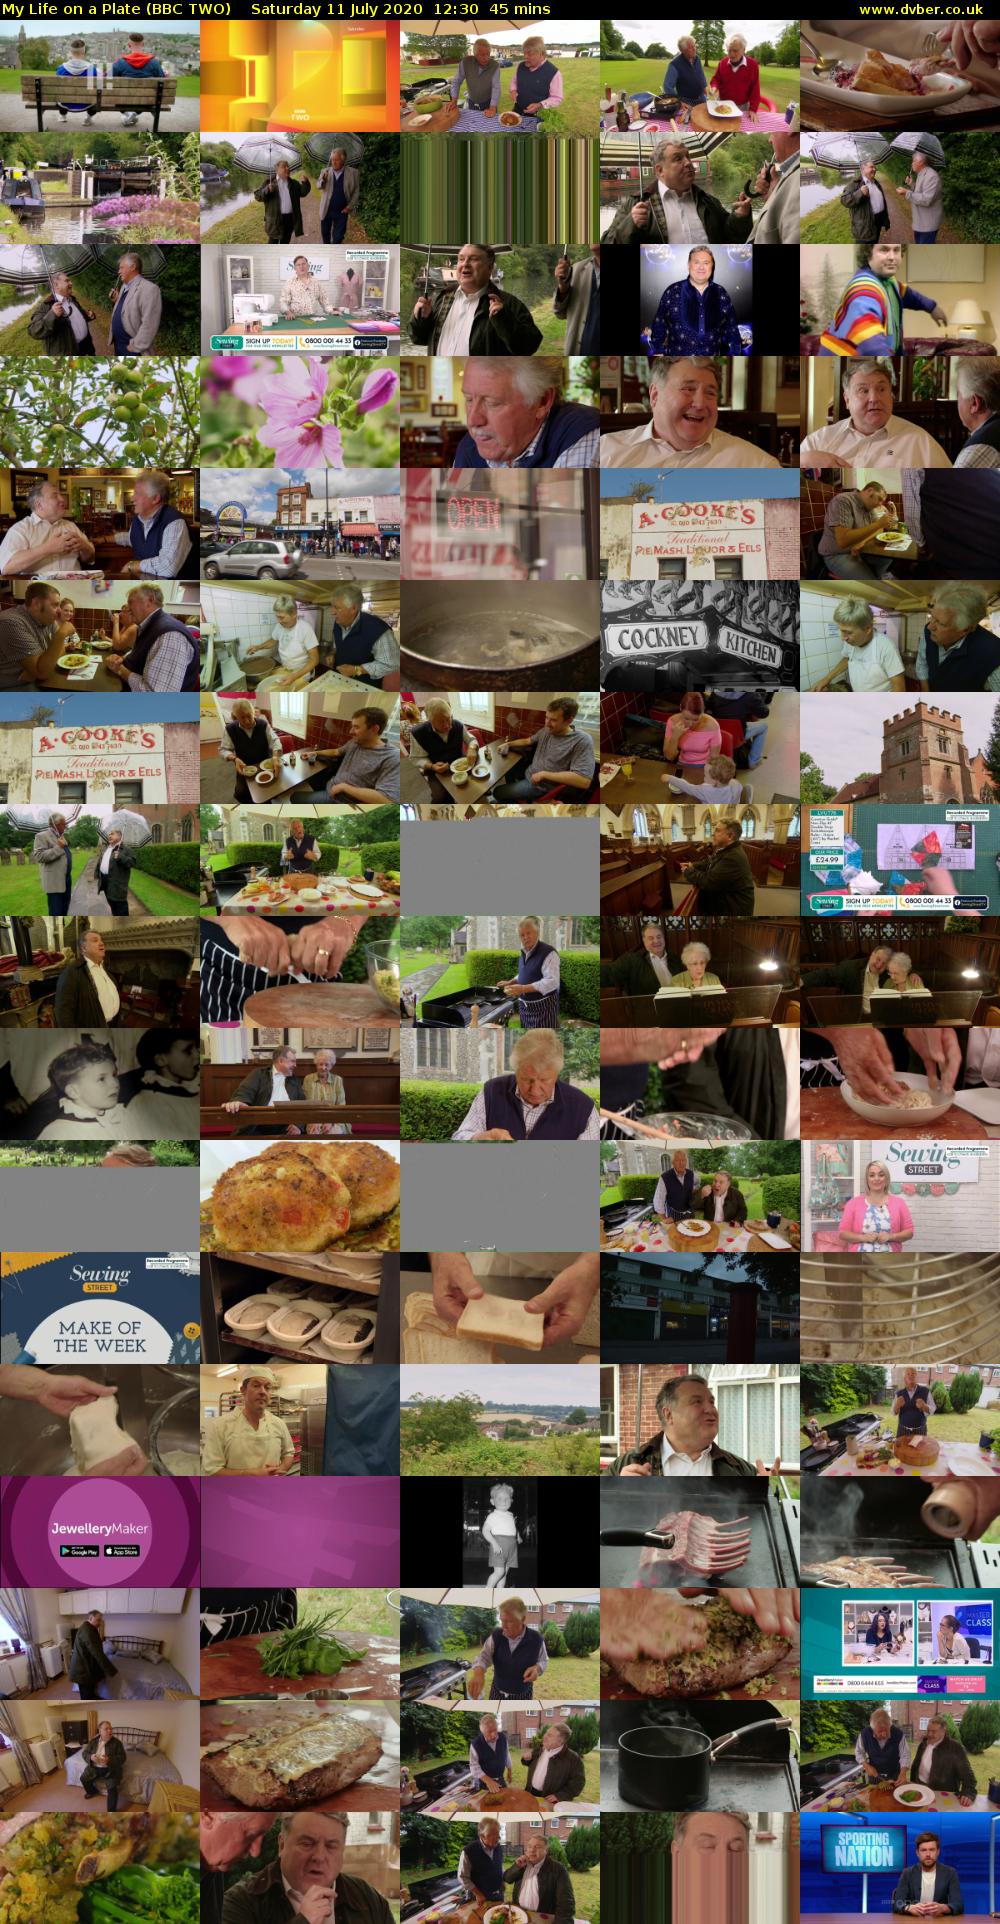 My Life on a Plate (BBC TWO) Saturday 11 July 2020 12:30 - 13:15